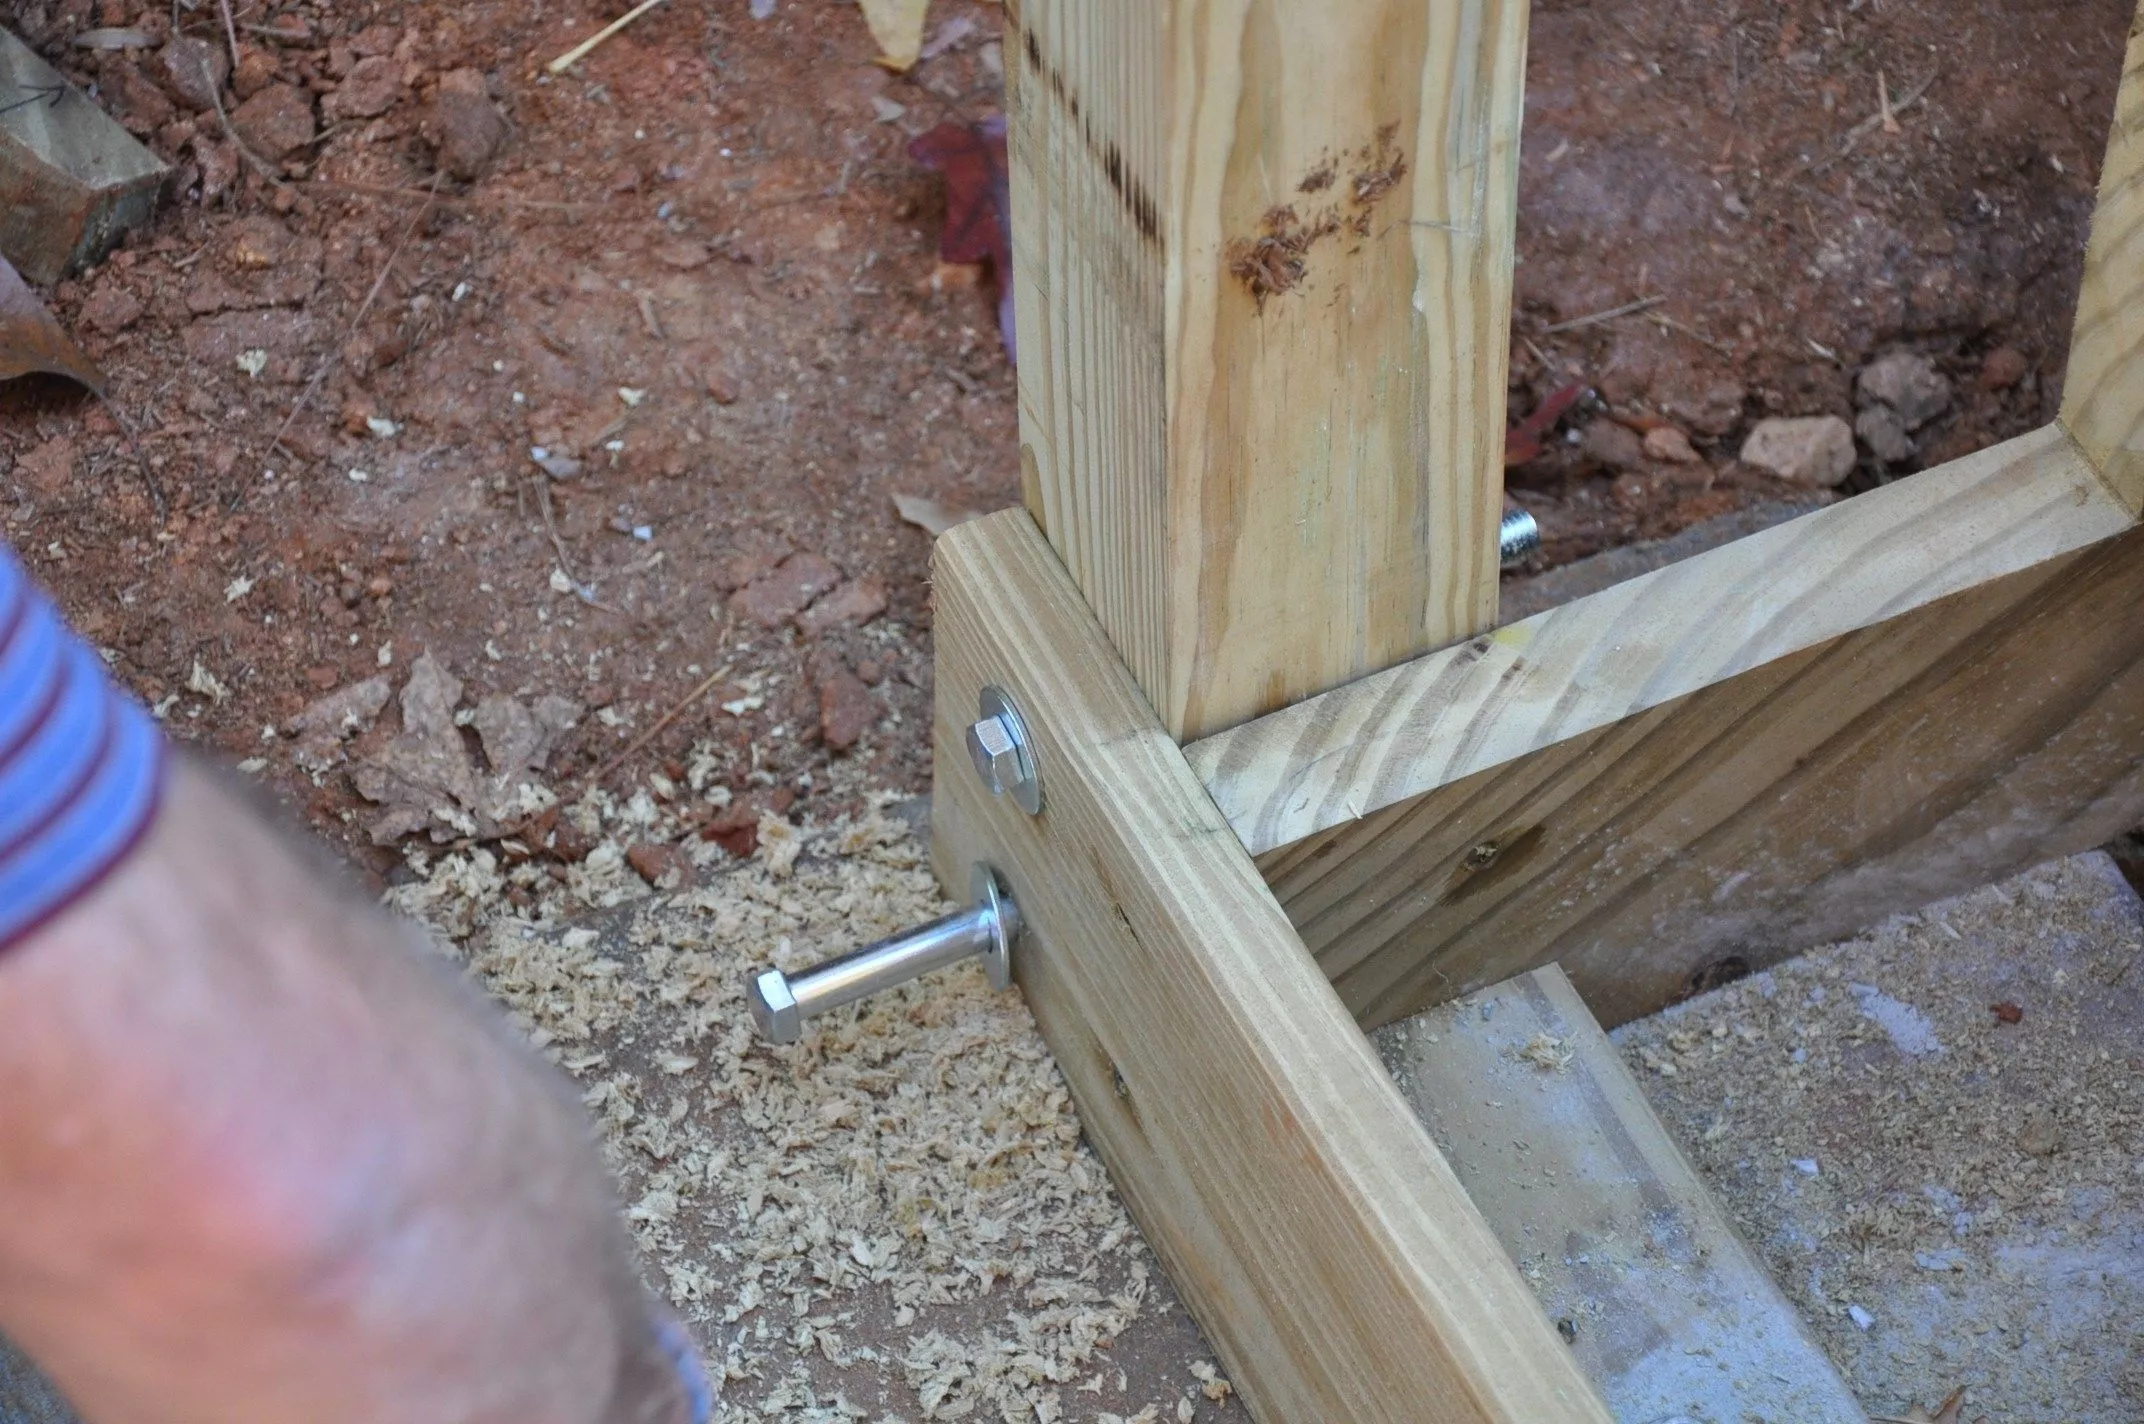 How To Attach 4x4 Post To Deck For Railing Building & Installing Deck Stair Railings | Decks.com